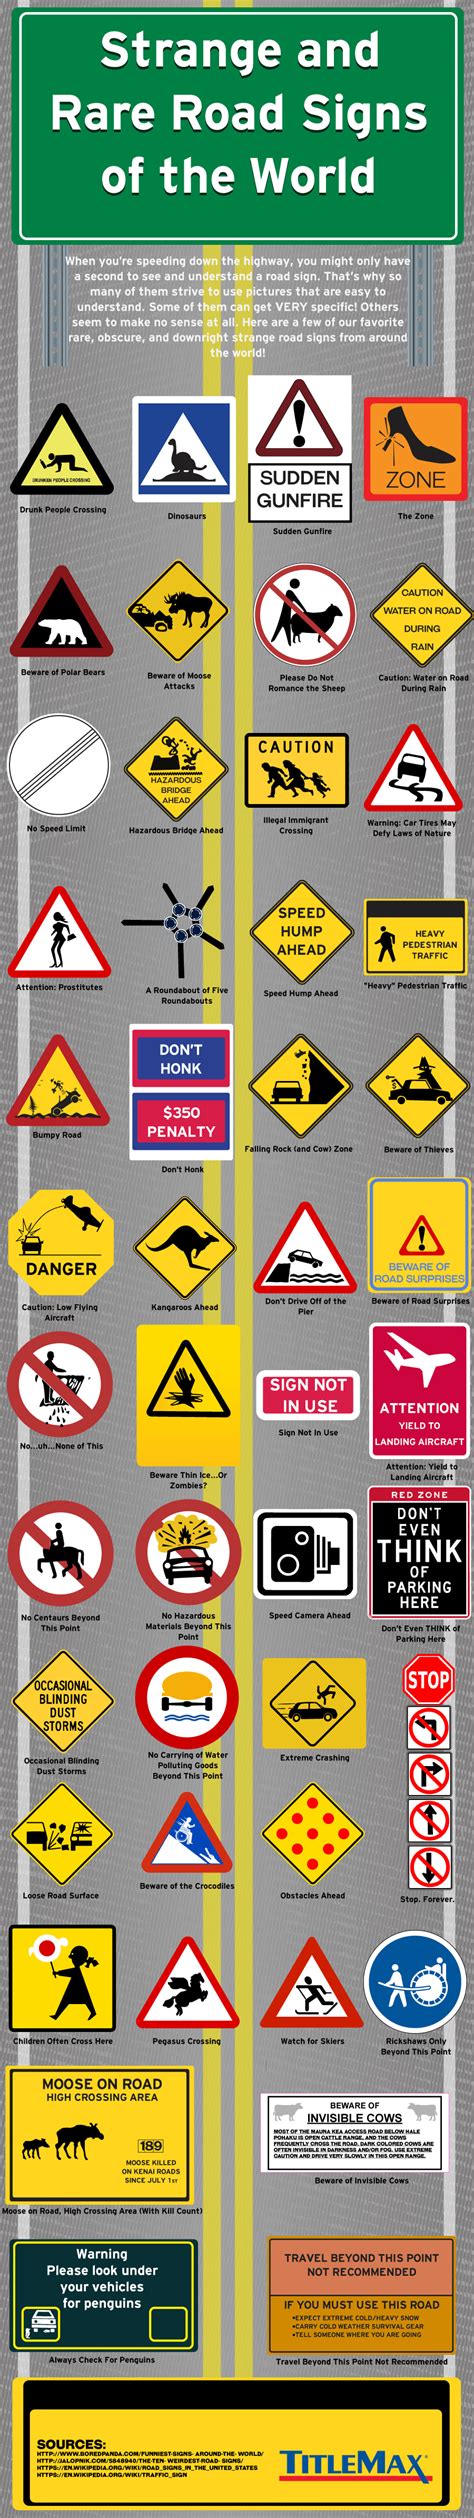 Weird And Rare Traffic Signs From Around The World Infographic